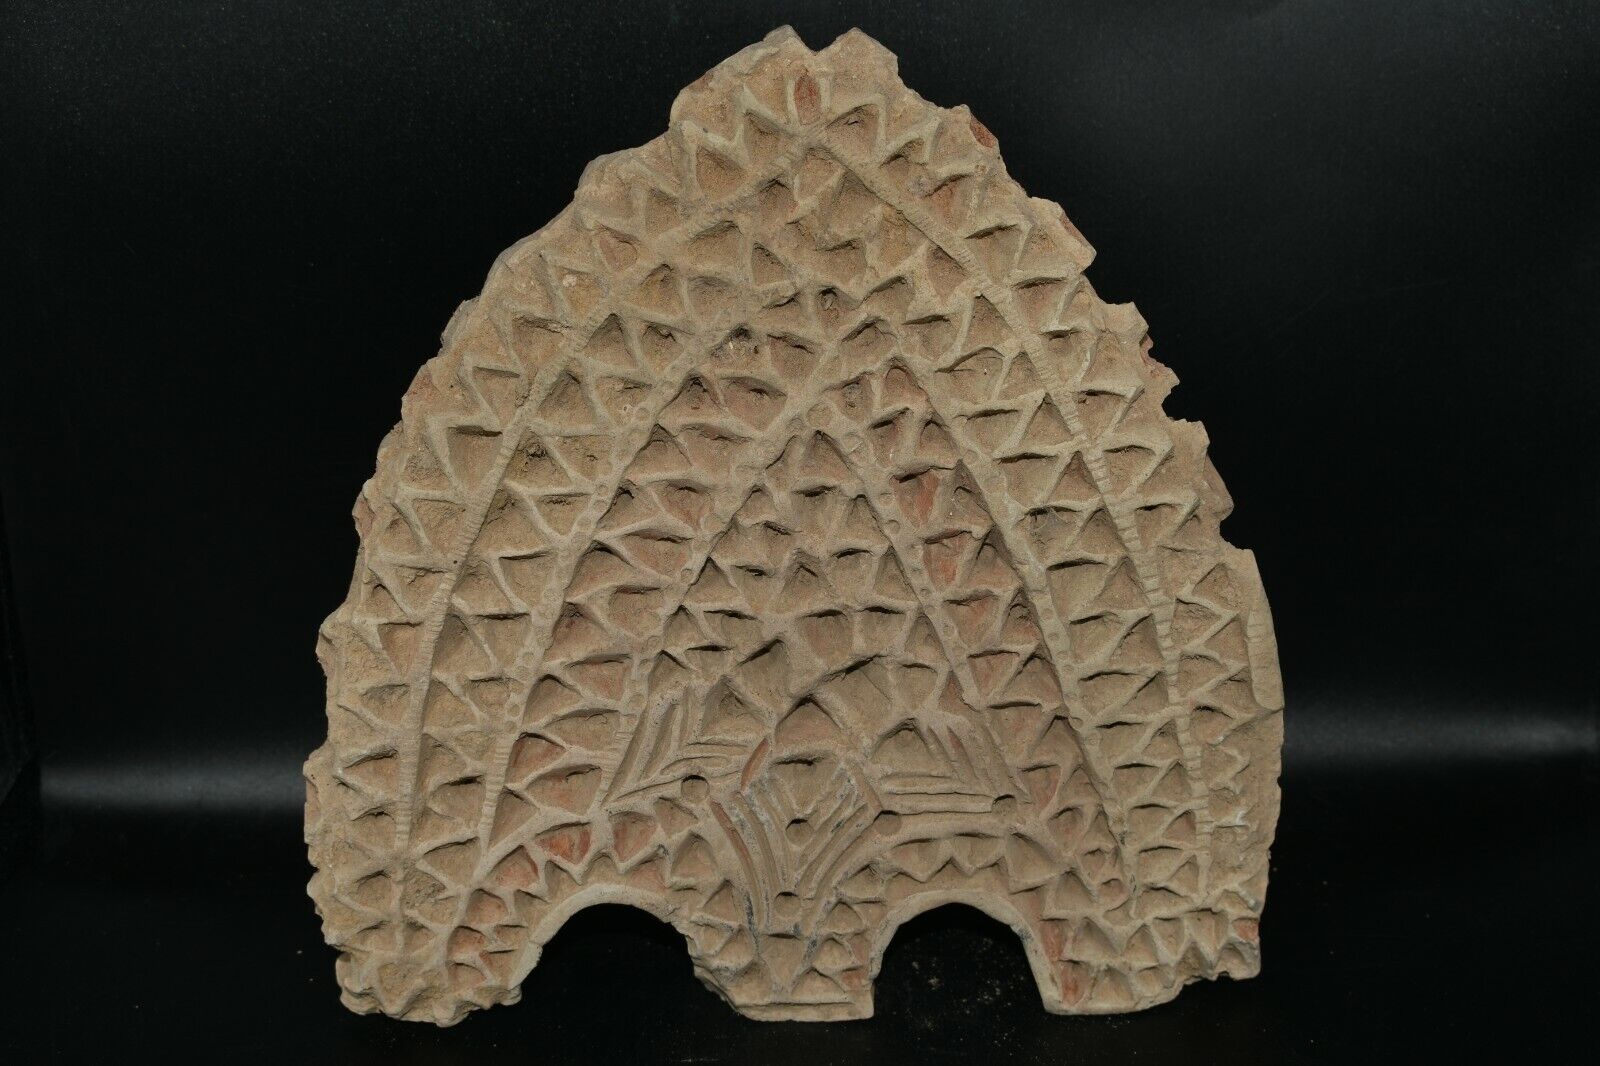 Genuine Ancient Islamic Terracotta Clay Tile From Historic Ancient Mosque